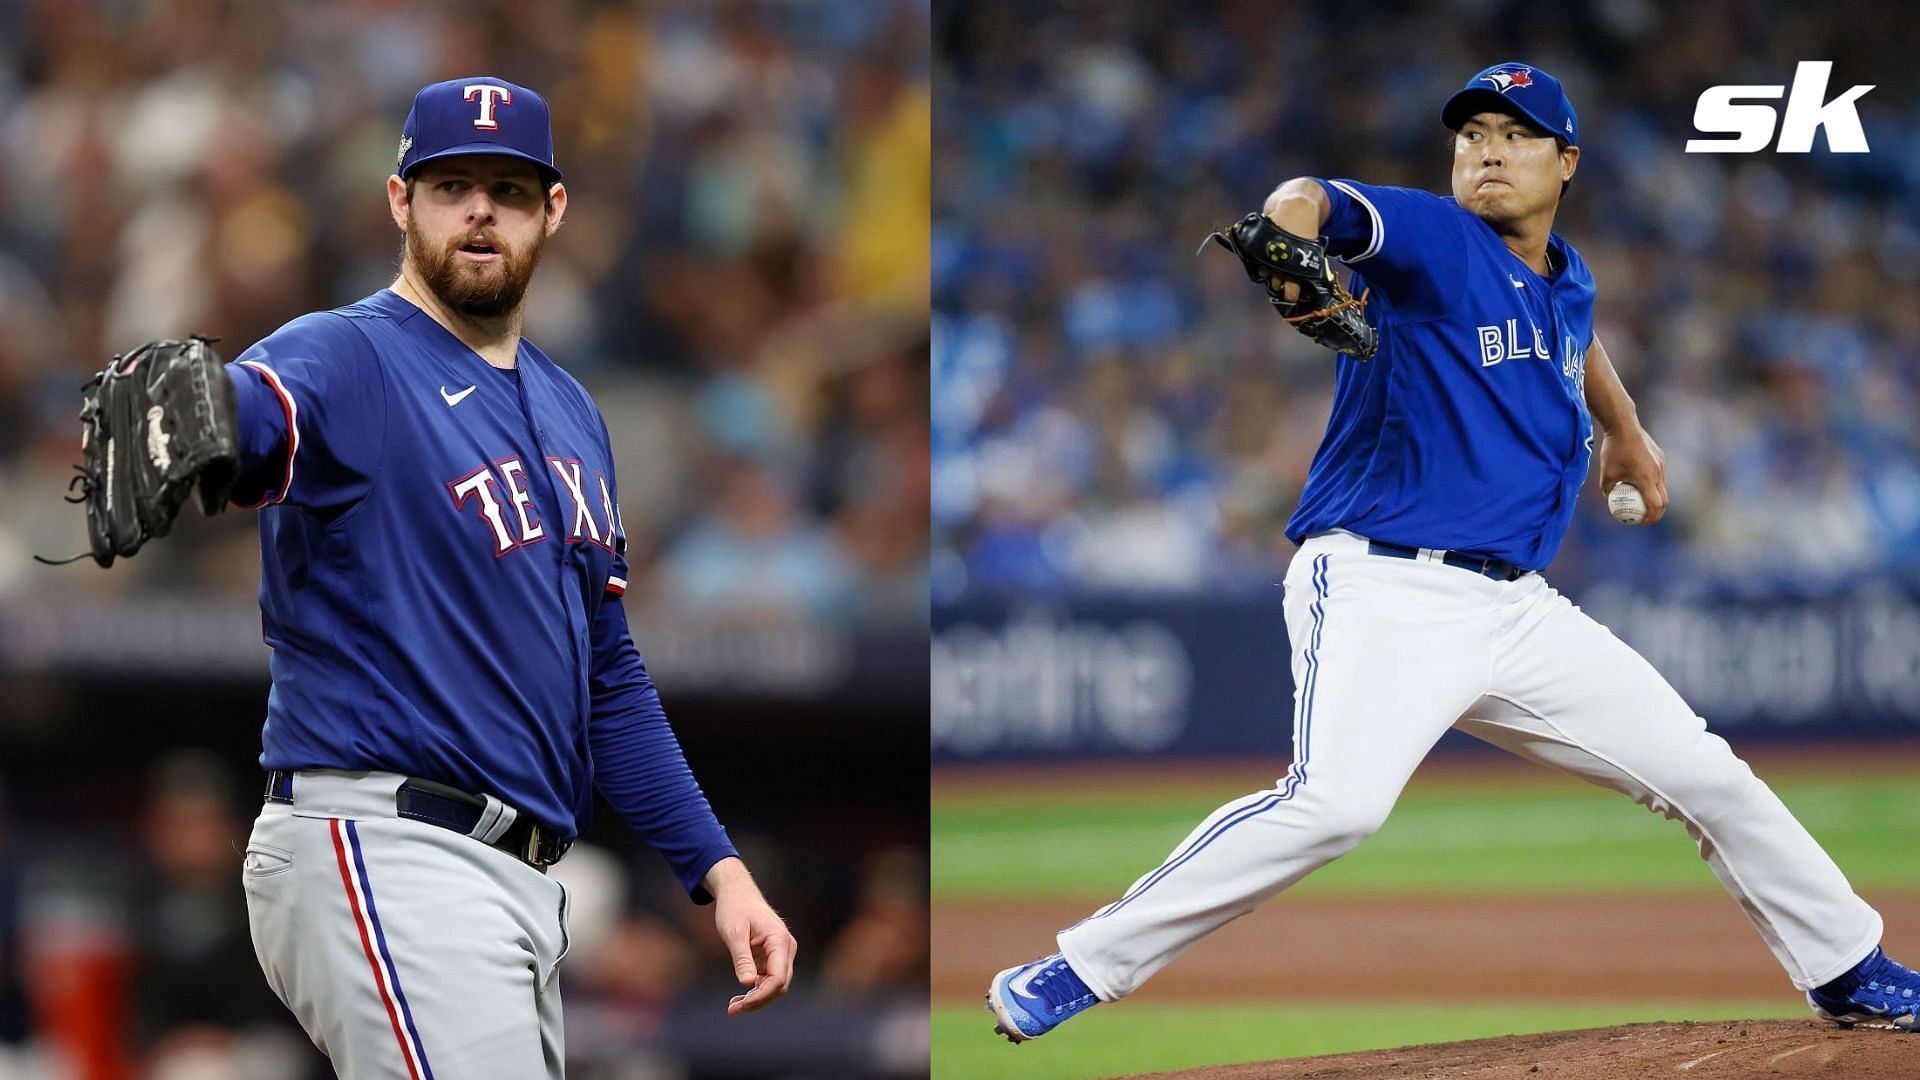 Jordan Montgomery and Hyun-Jin Ryu could be two potential starting pitcher targets for the Texas Rangers